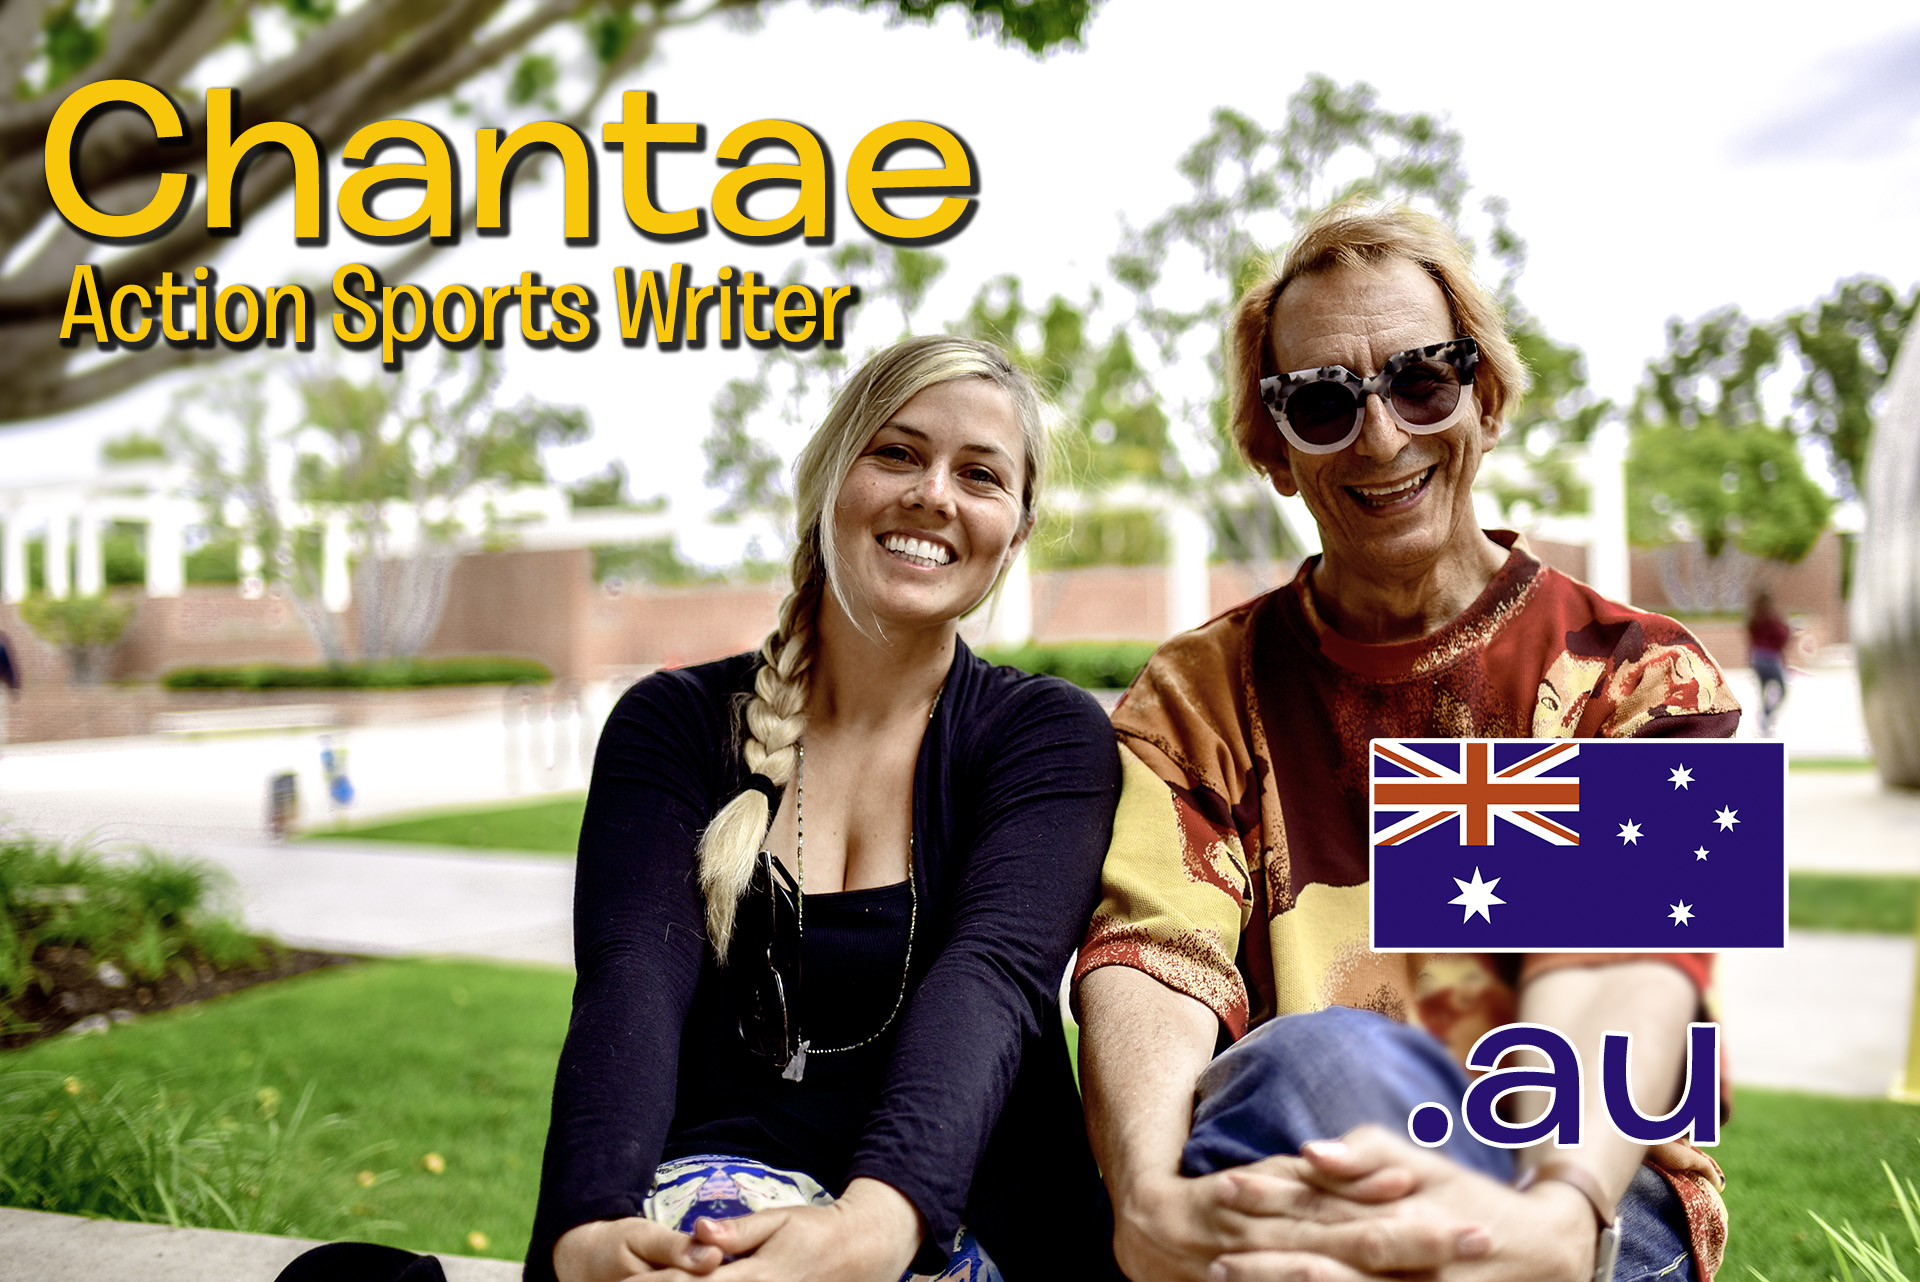 Chantae Reden and Glenn Zucman at the Coffee Bean & Tea Leaf at the University Student Union at Long Beach State University. Chantae and Glenn sit on a bench facing the camera and with their hands around their knees. Superimposed text reads, "Chantae: Action Sports Writer" and there is a small Australian flag and the TLD for Australia, ".au"